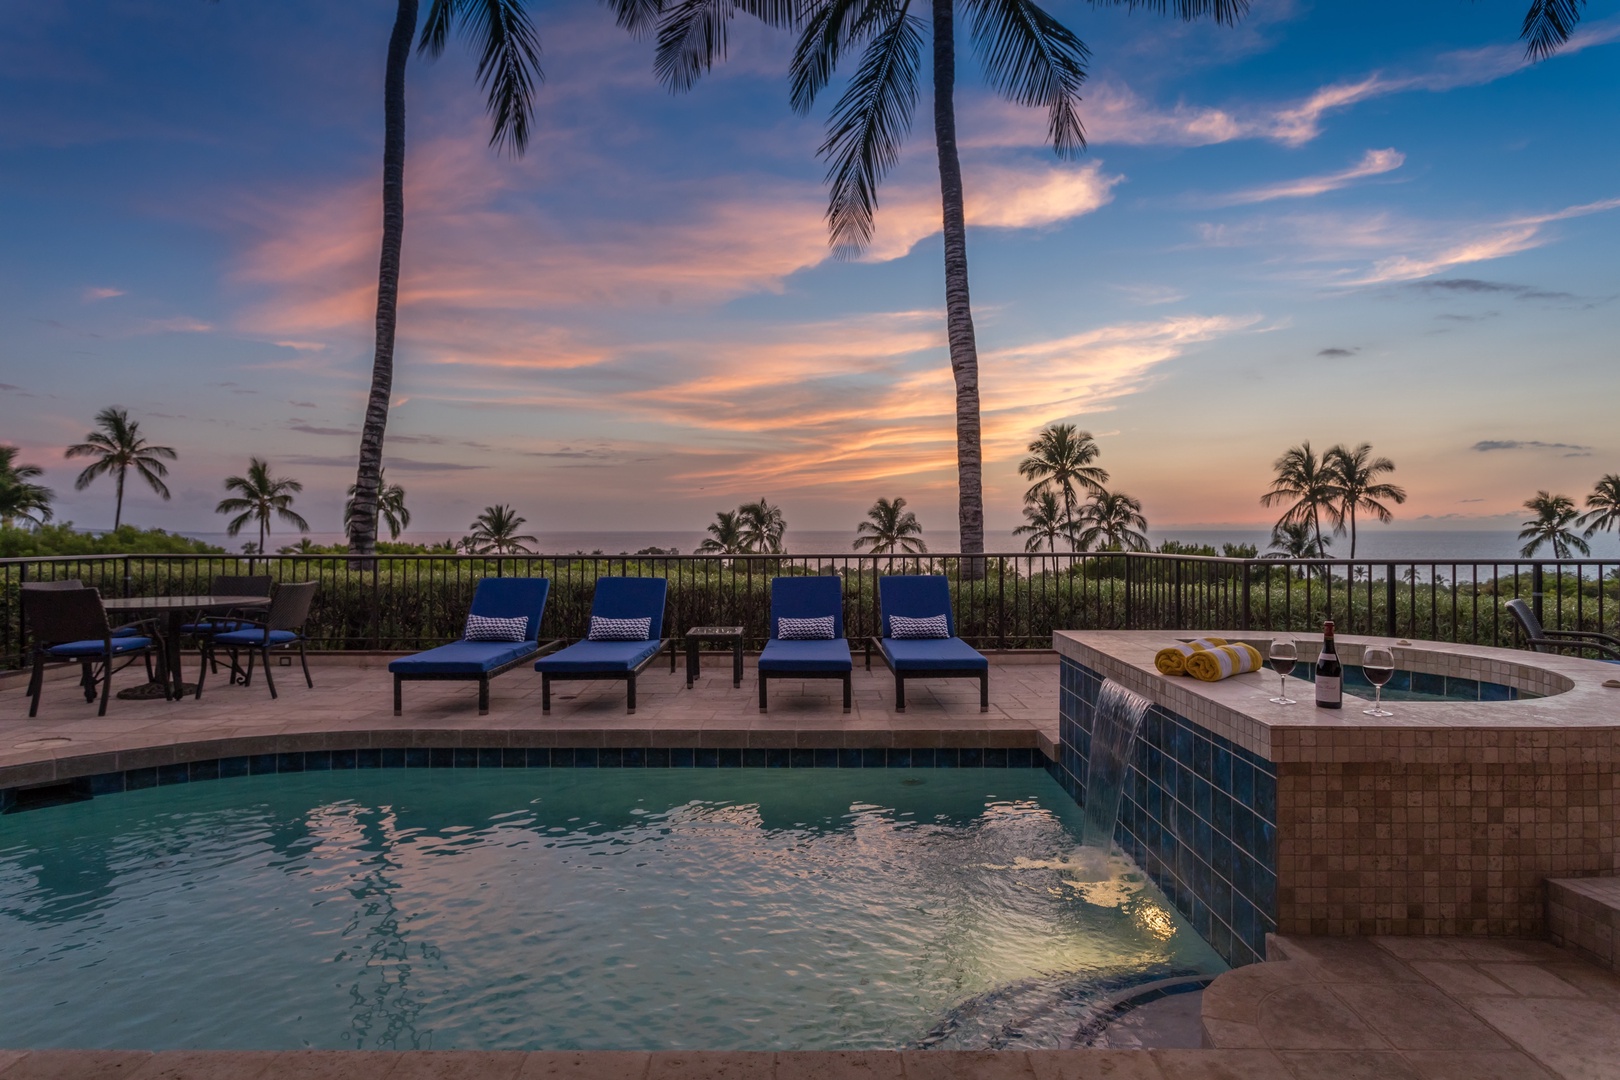 Kamuela Vacation Rentals, OFB 3BD Villas (39) at Mauna Kea Resort - Tropical sunsets from your own slice of paradise.